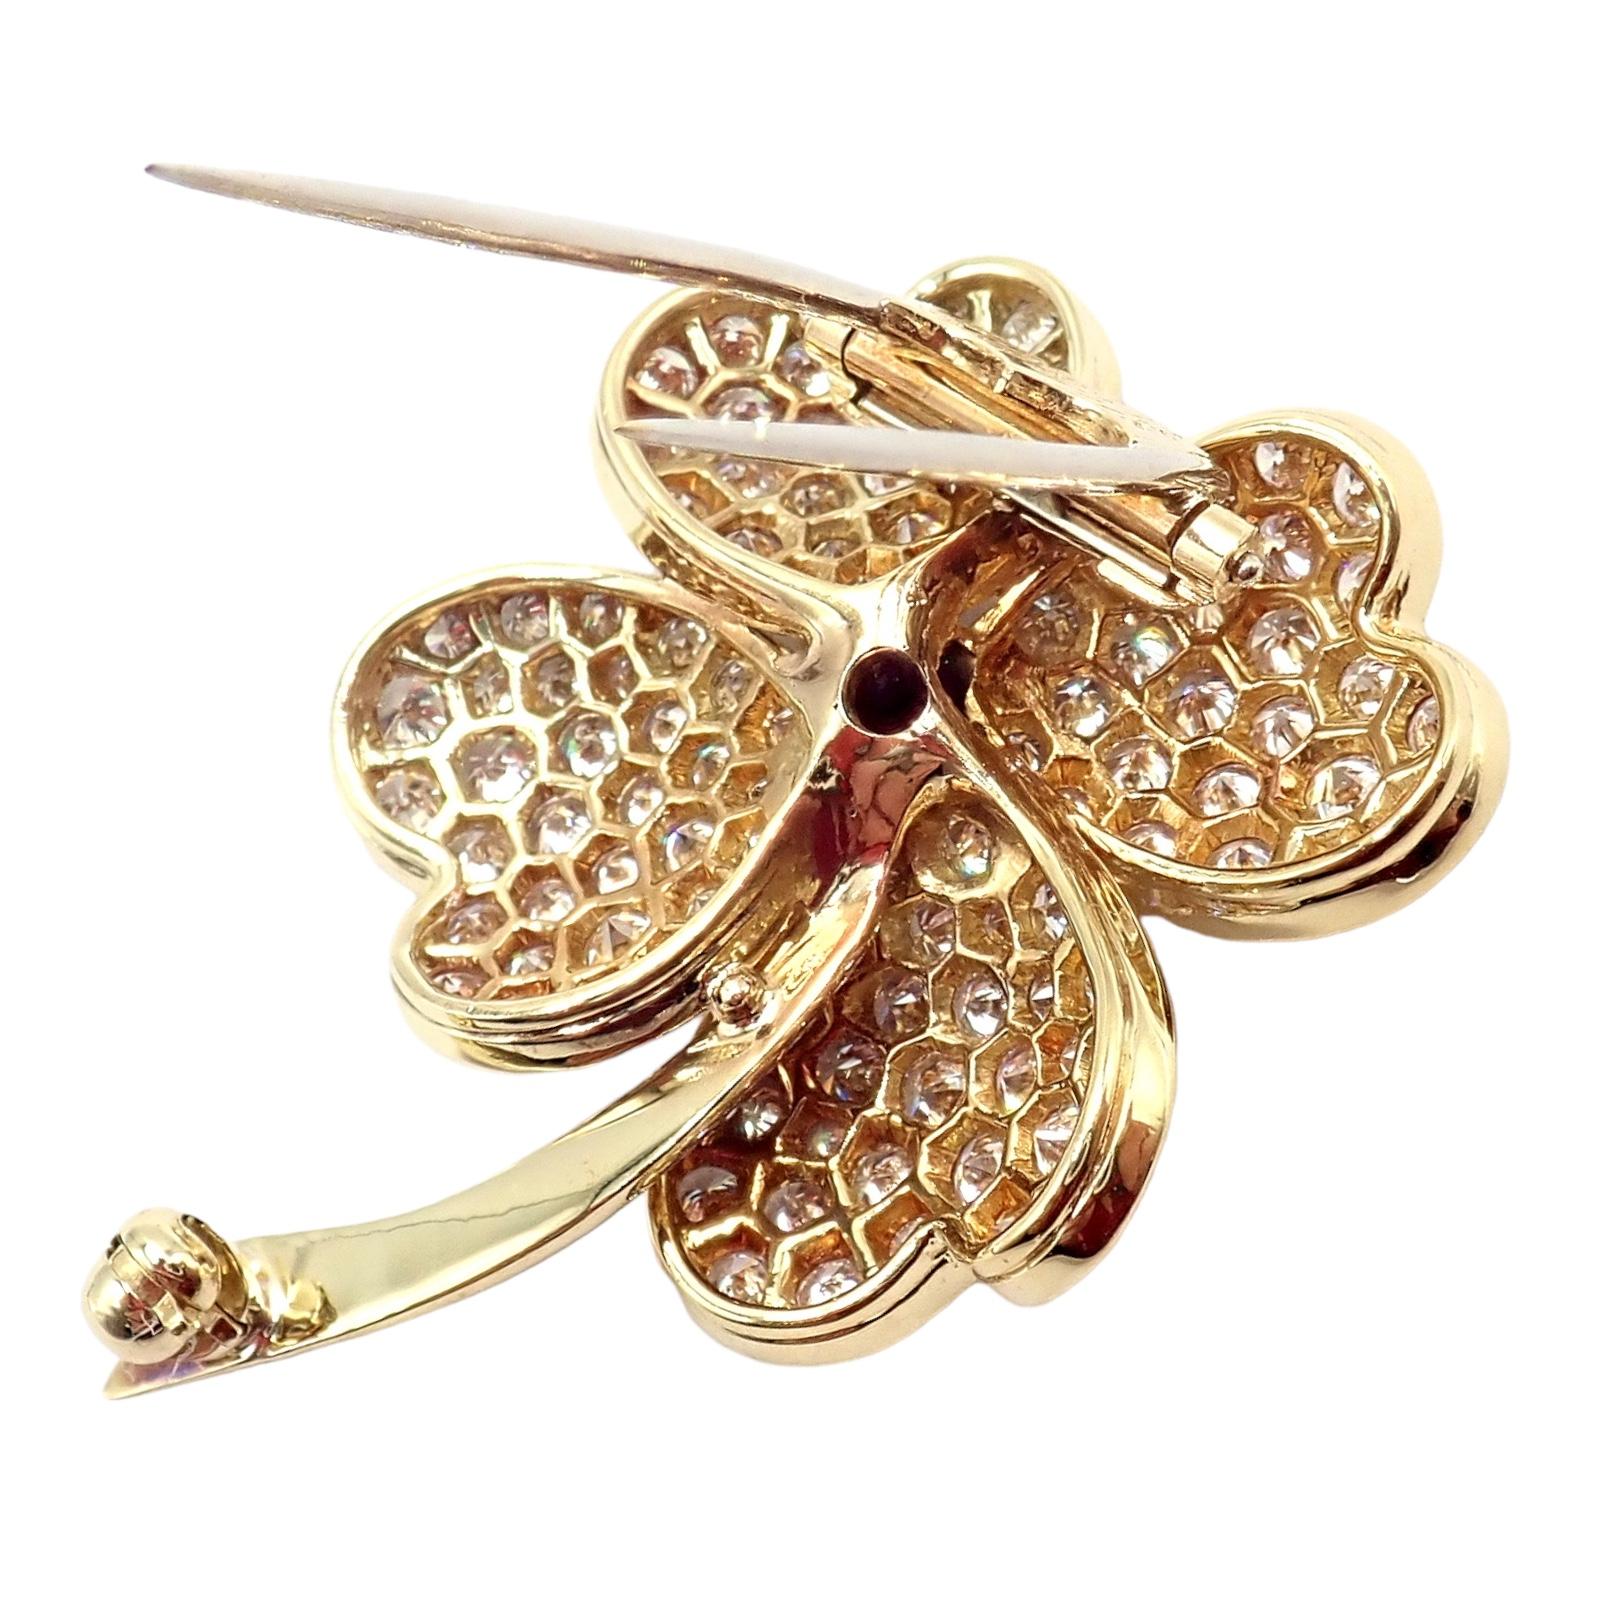 Van Cleef & Arpels Cosmos Diamond And Ruby Yellow Gold Pendant Brooch For Sale 3